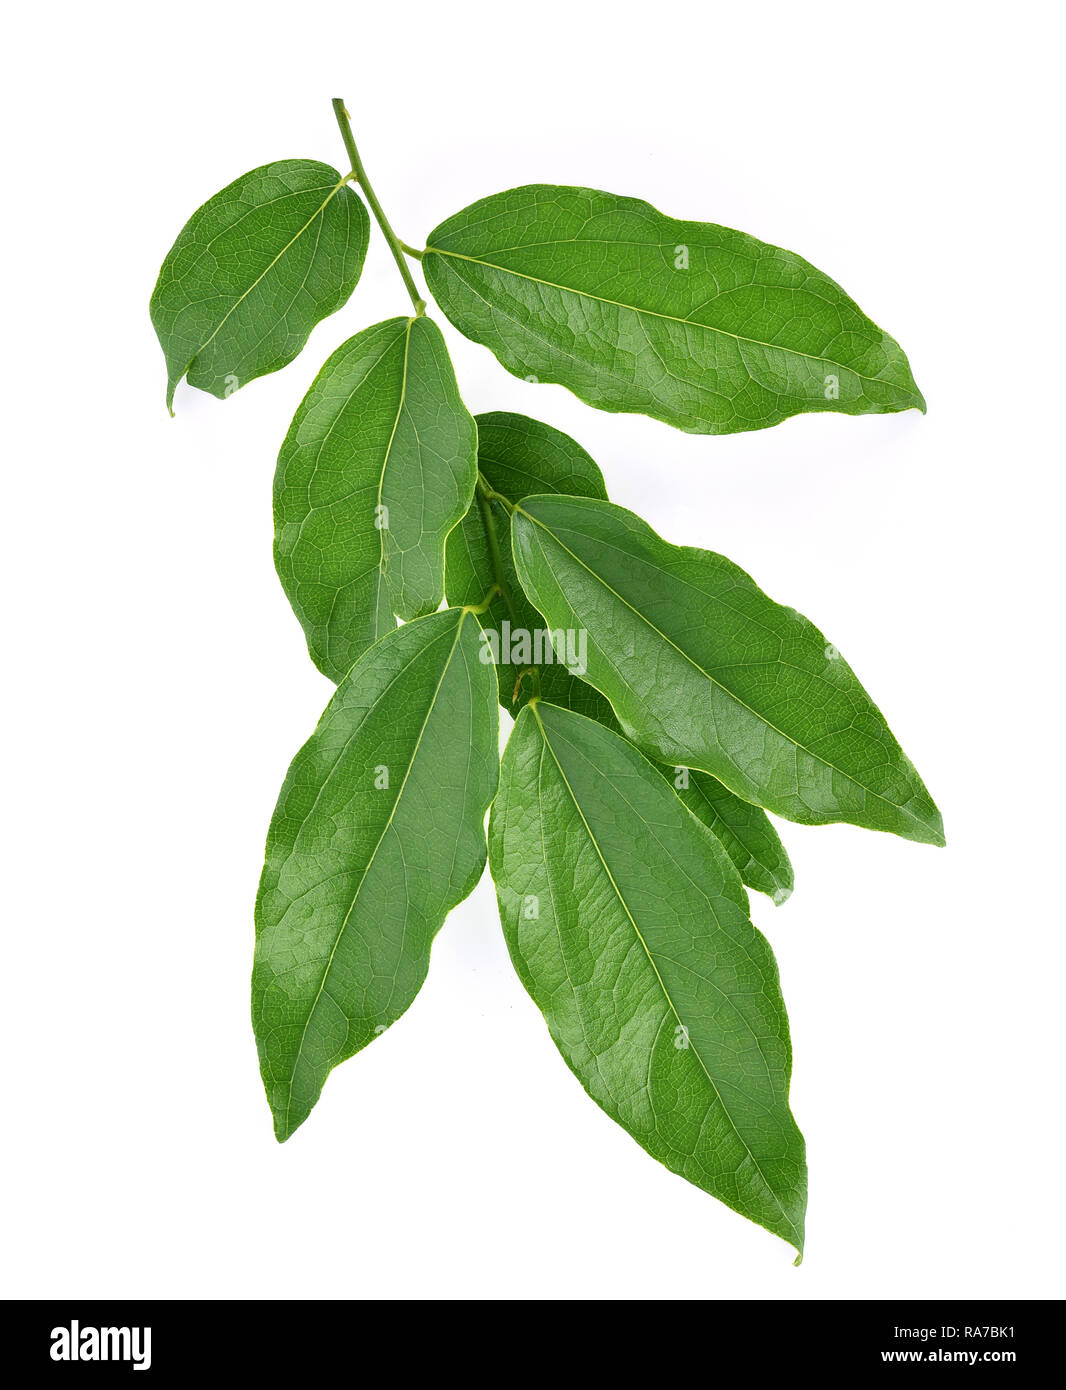 Top view of Yanang leaf isolated on white background Stock Photo